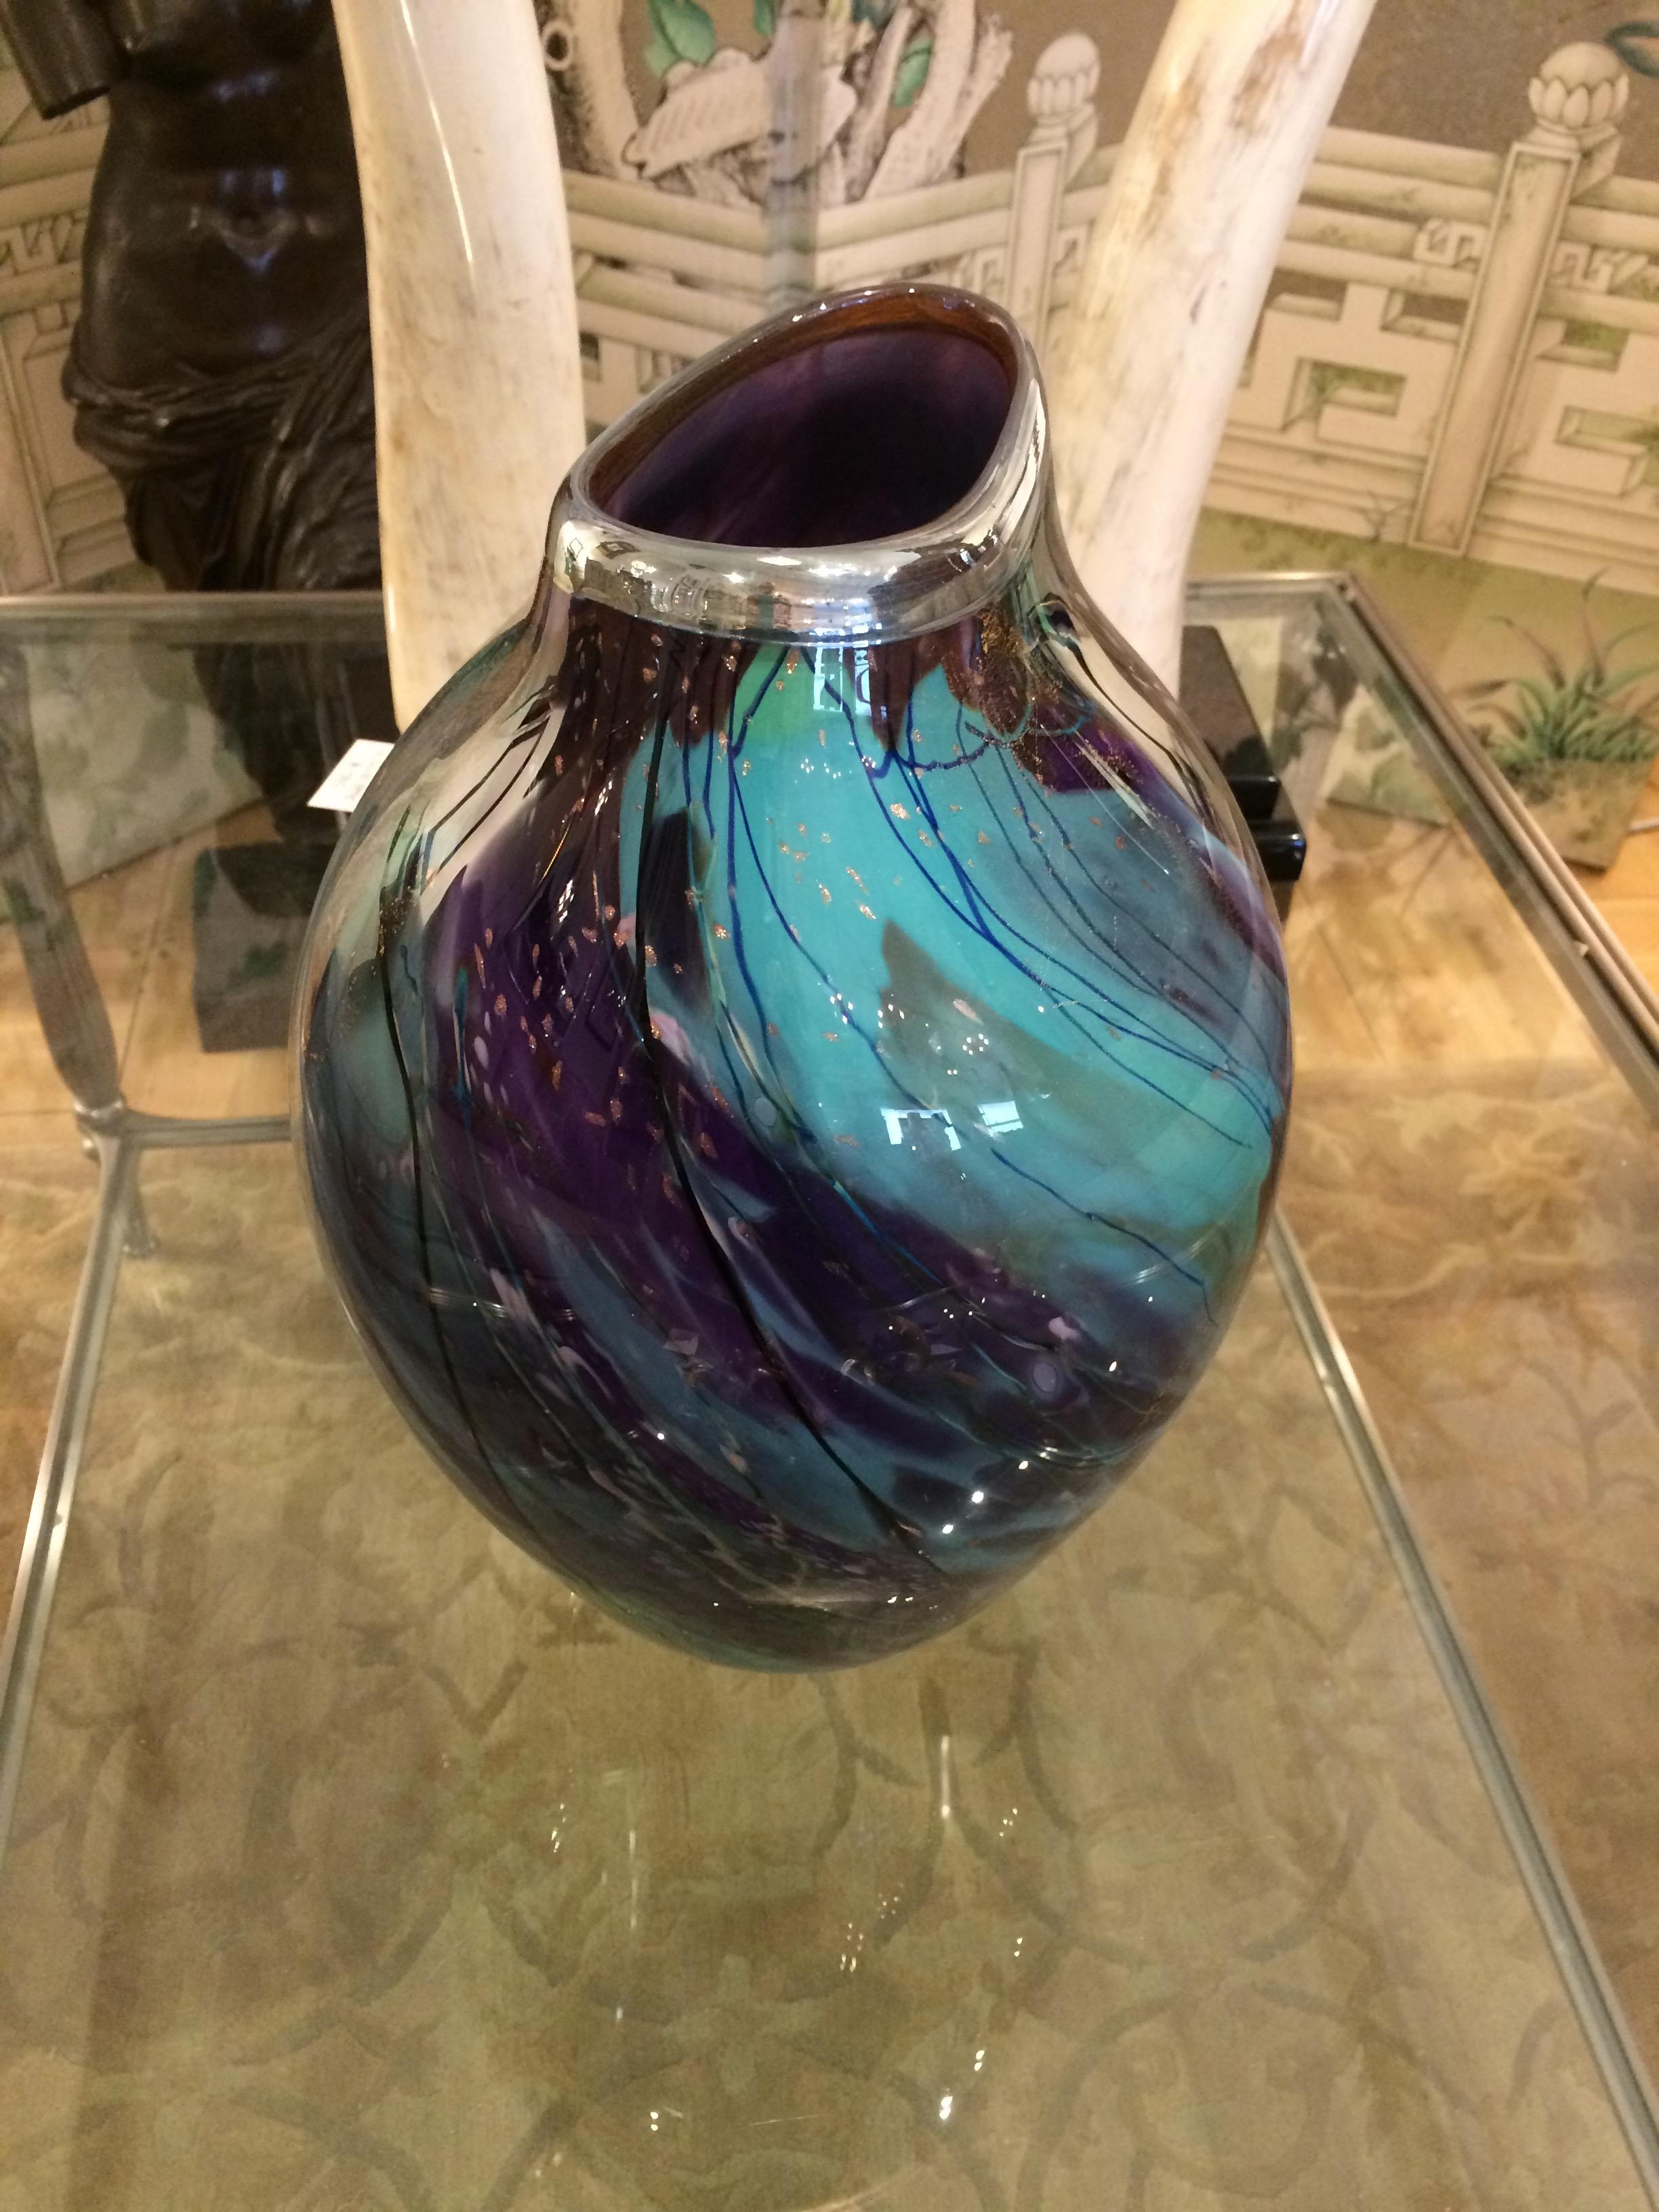 Magnificent handblown glass vase by artist Tim Lazer having a melange of gorgeous turquoises, purples and flecks of gold leaf in an abstract symphony, topped with a silver leaf rim around the 5.5 x 3.25 asymmetrical opening.